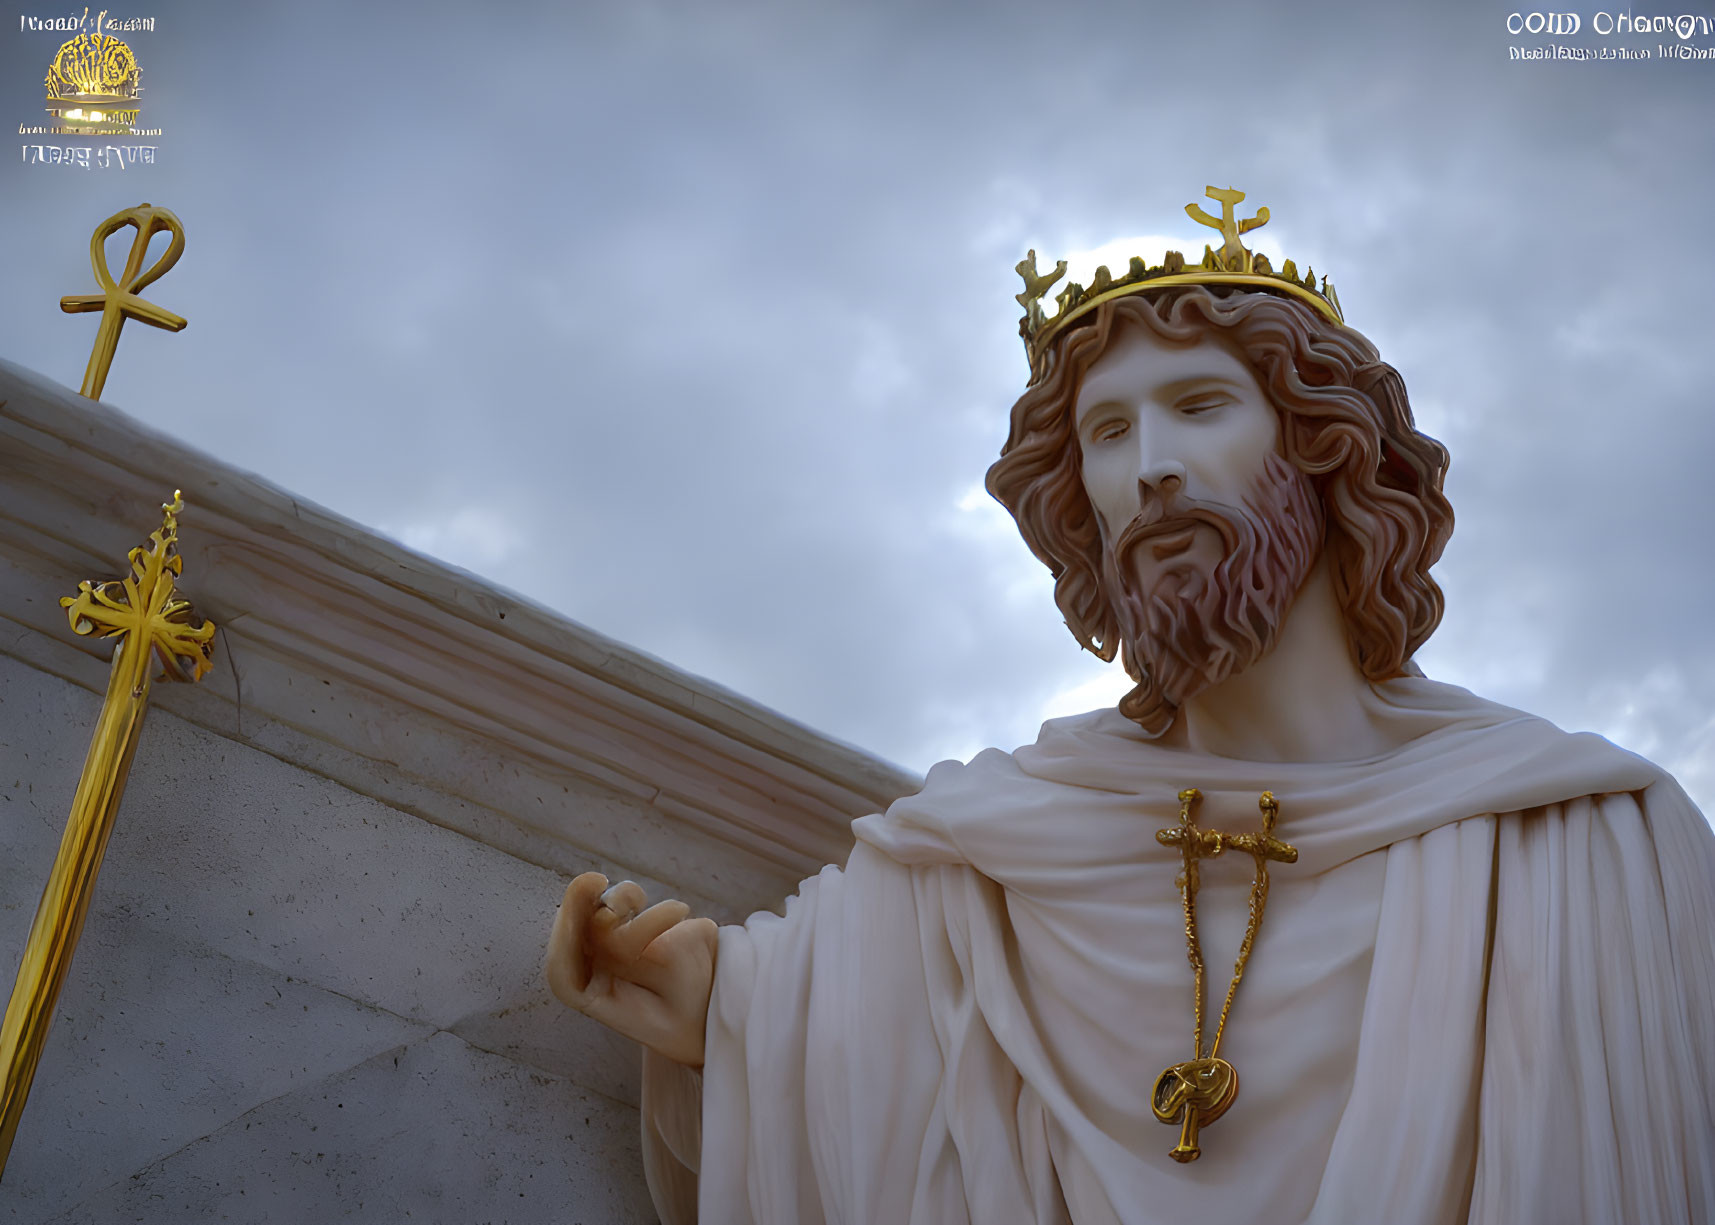 Crowned figure statue with gold key, Greek letters, and Christian cross emblem against blue sky